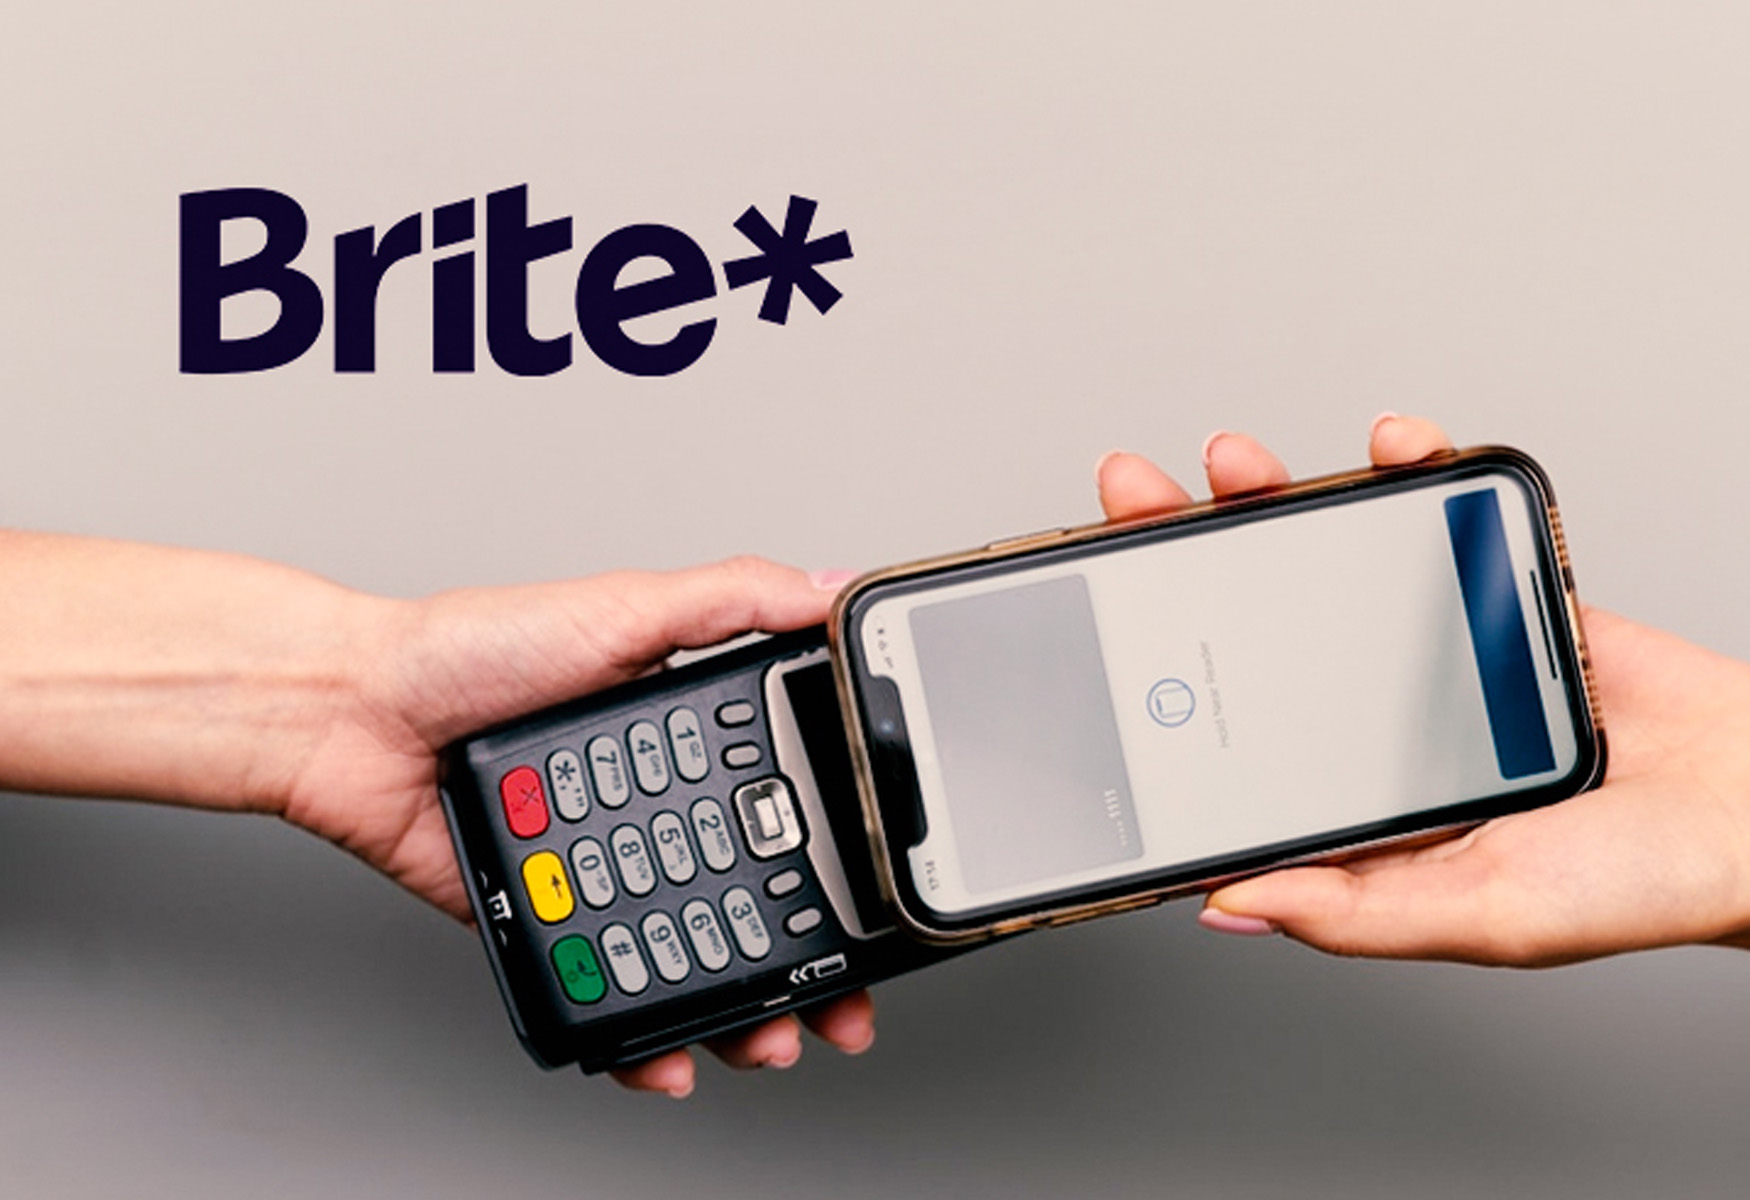 open-banking-revolutionizes-fintech-as-brite-secures-60-million-funding-for-account-to-account-payments